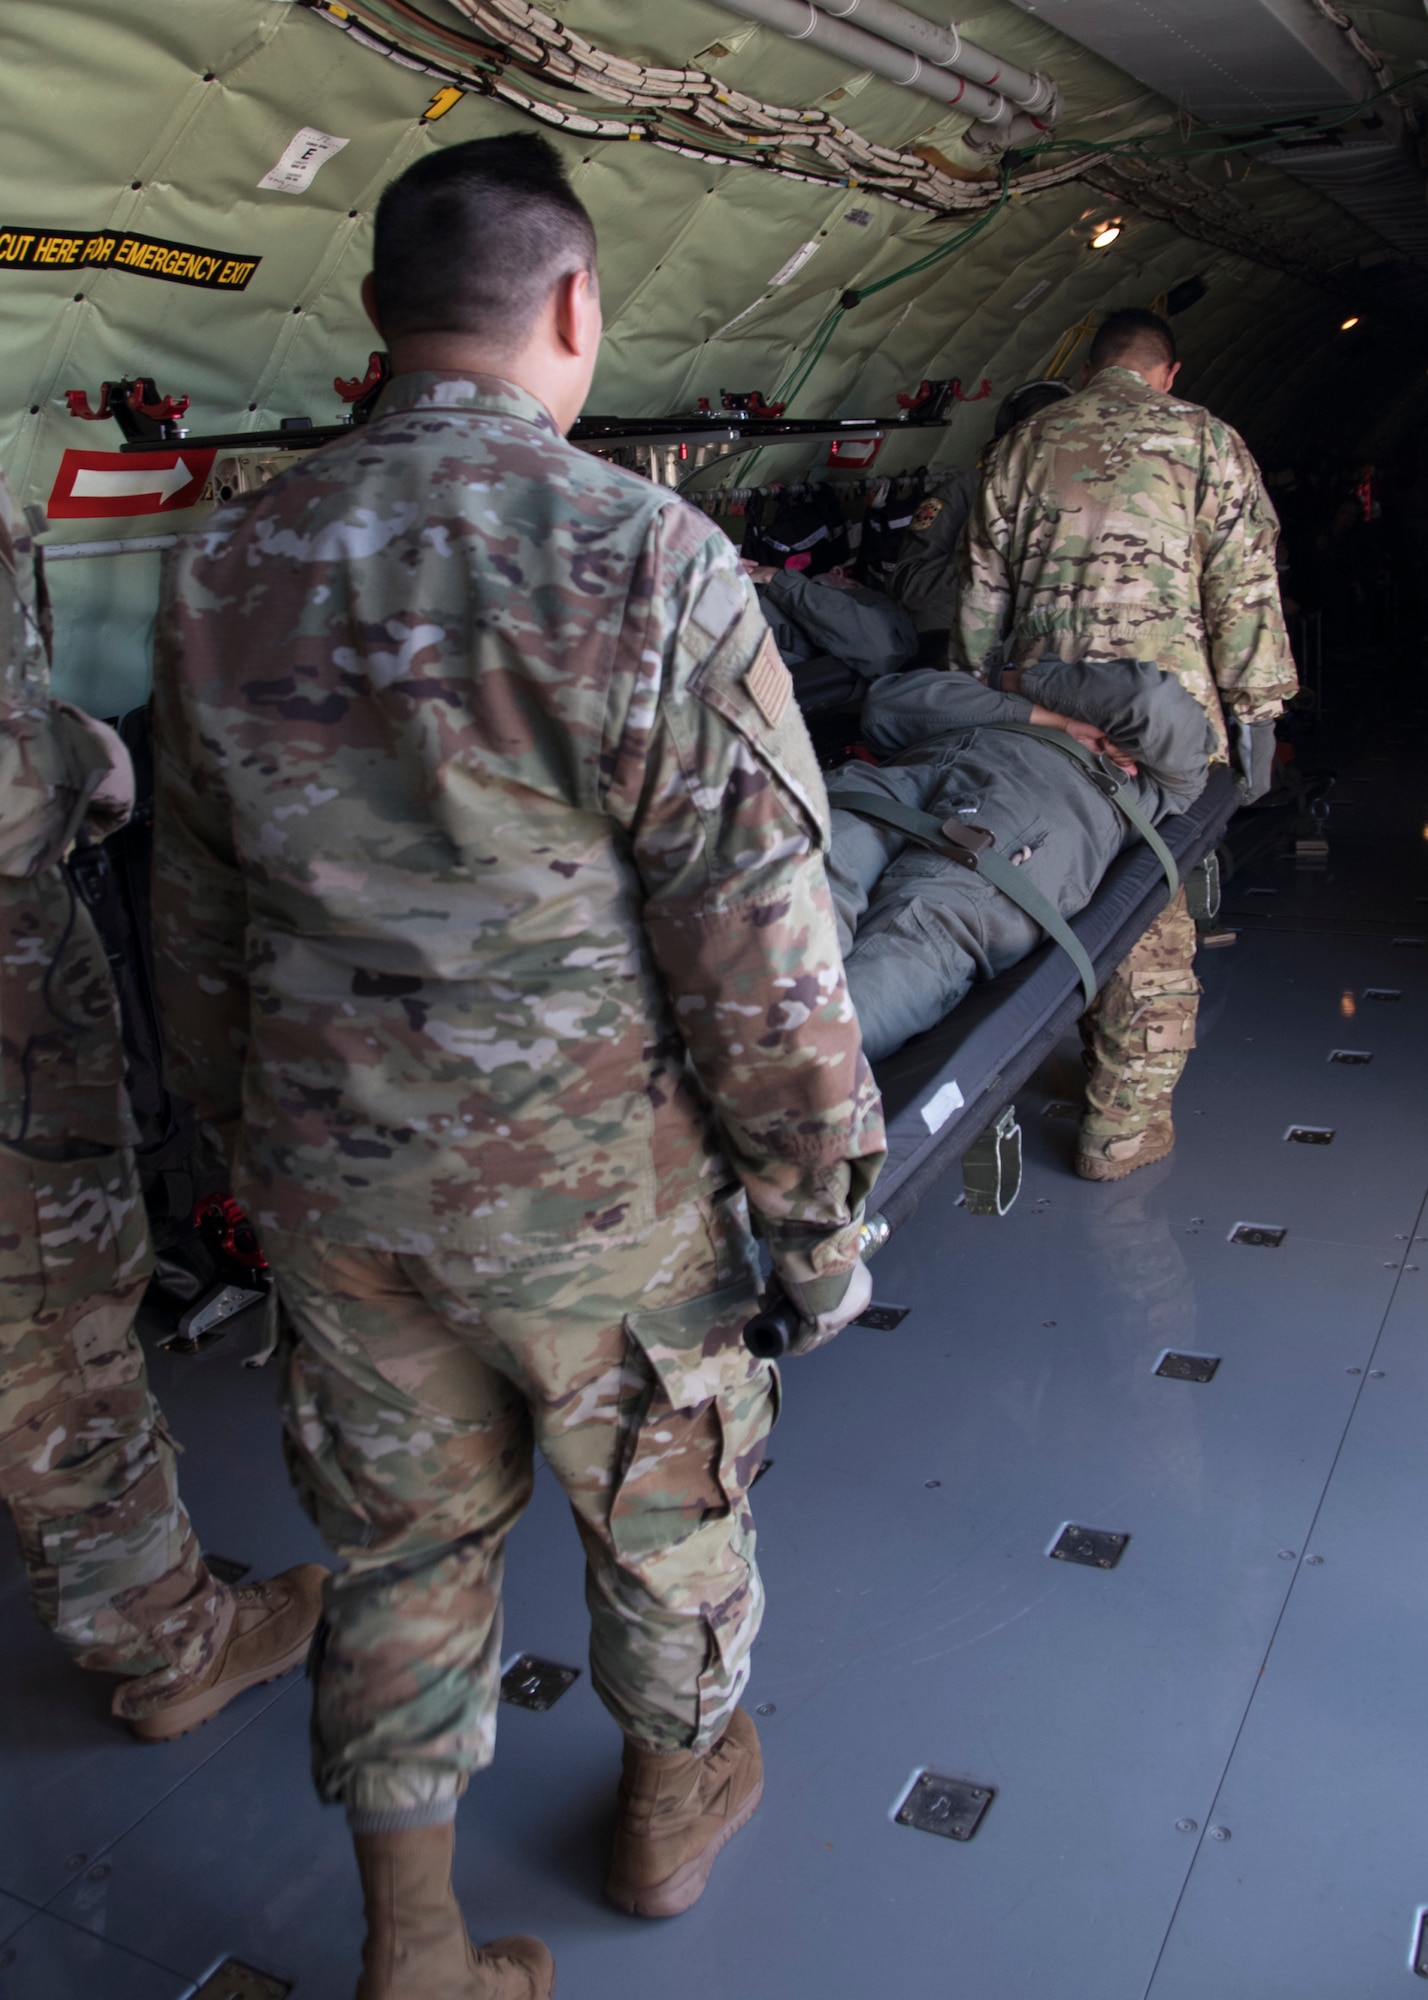 Members of the 459th Aeromedical Evacuation Squadron carry a patient onto a KC-135 Stratotanker in preparation for an off station trainer, Sept. 20, 2019 at Joint Base Andrews, Md. The team conducted the training on the way to Wright Patterson Air Force Base, Ohio, where they also ran in the Air Force Marathon. (U.S. Air Force photo by Staff Sgt. Cierra Presentado/Released)